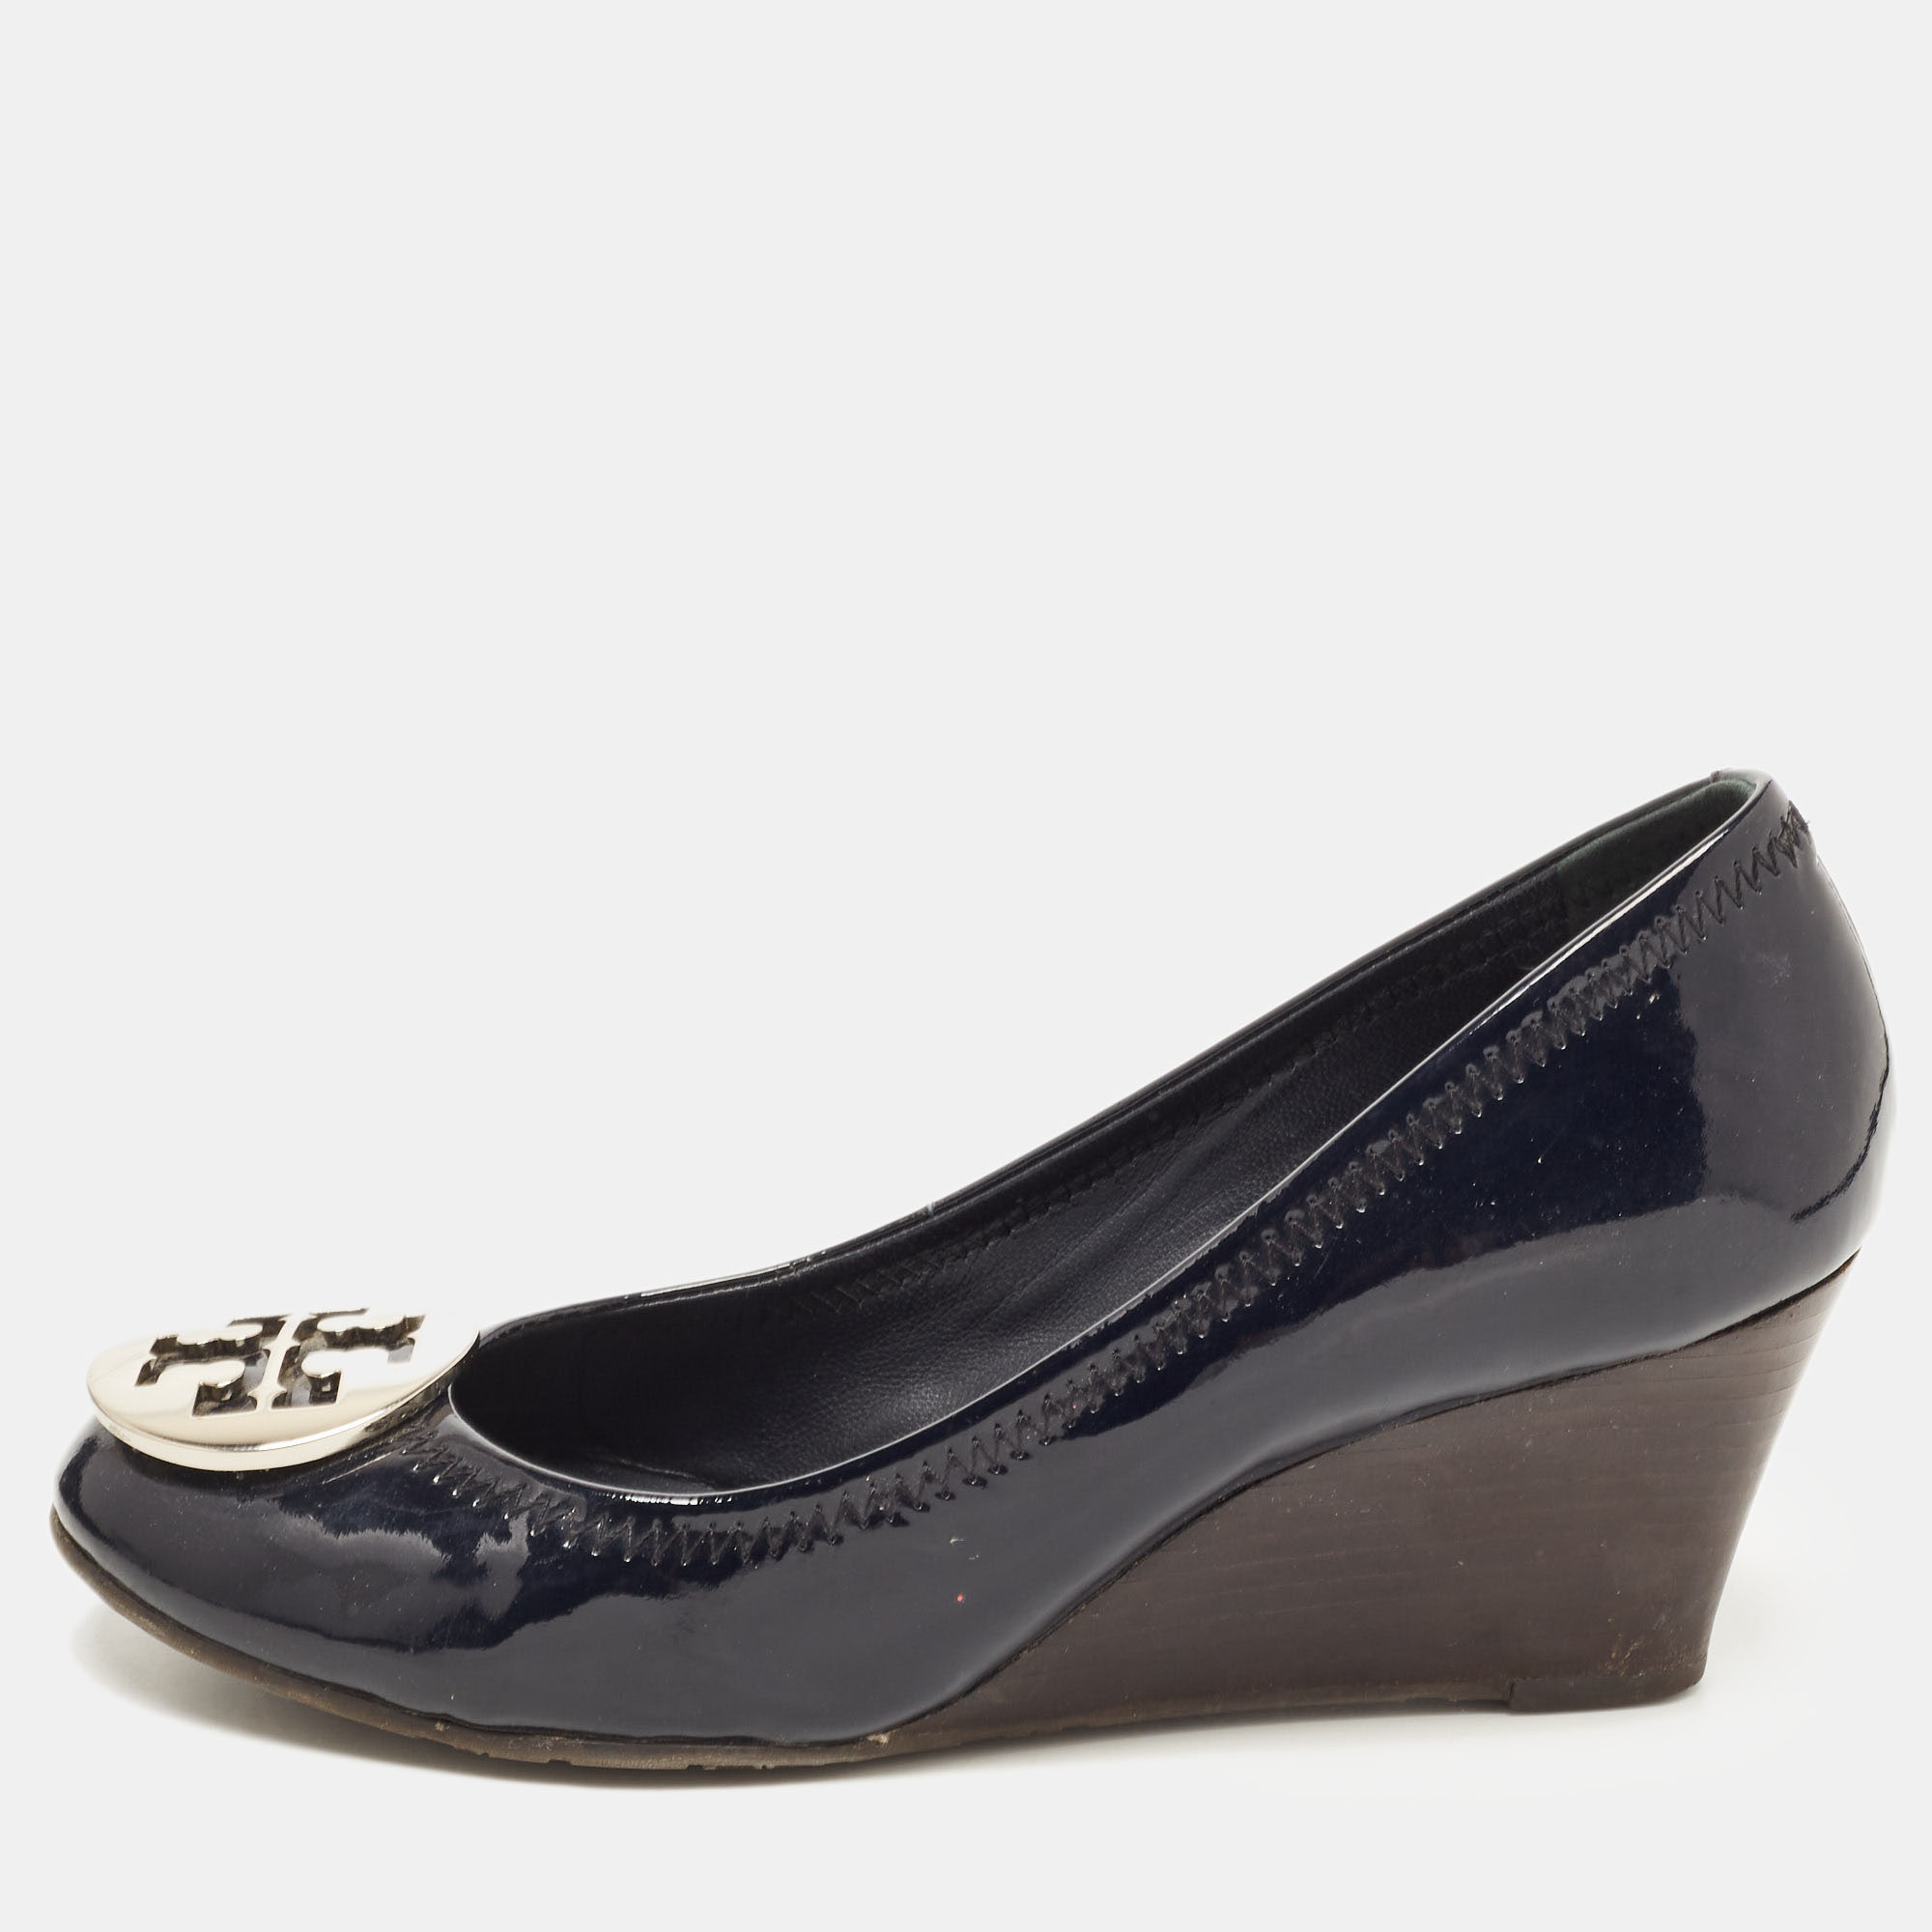 

Tory Burch Navy Blue Patent Leather Wedge Pumps Size